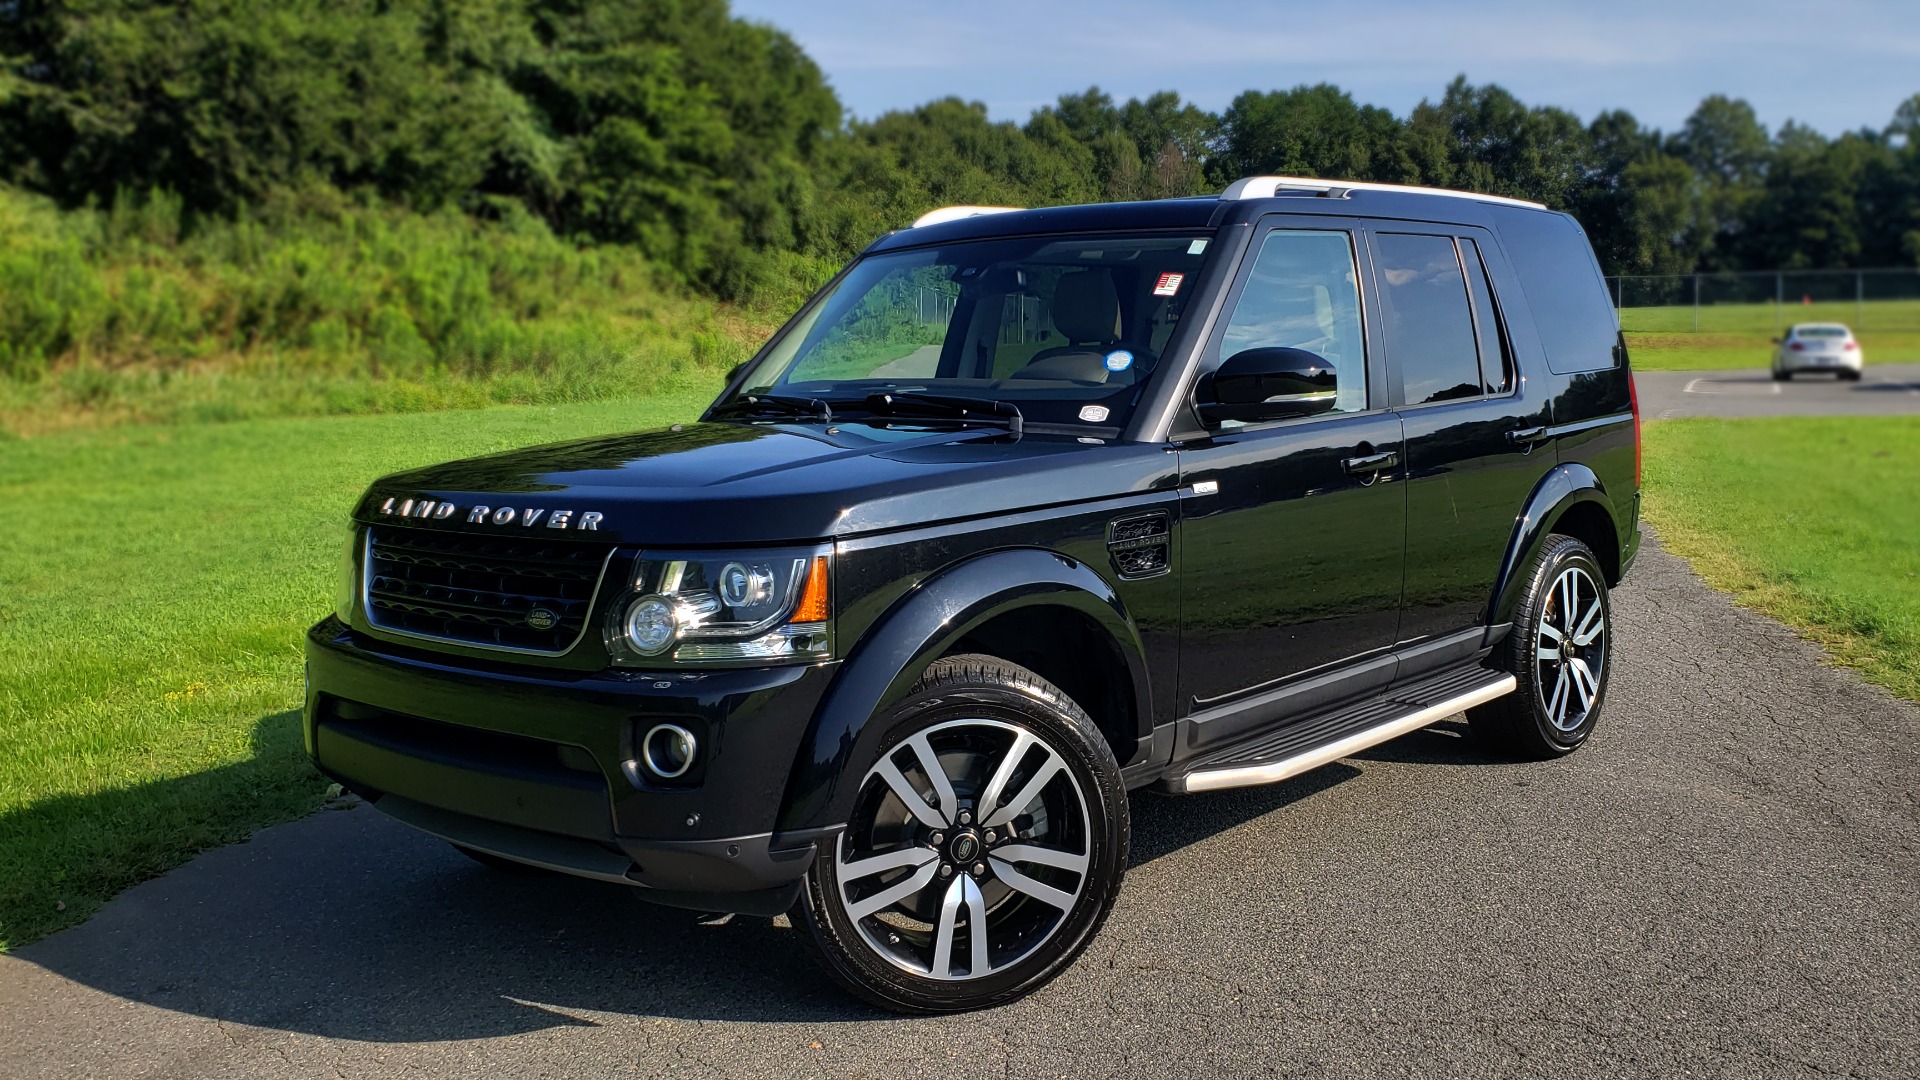 Used 2016 Land Rover LR4 HSE LUX LANDMARK EDITION / NAV / HTD STS / SUNROOF  / REARVIEW For Sale ($31,995) | Formula Imports Stock #F10268B